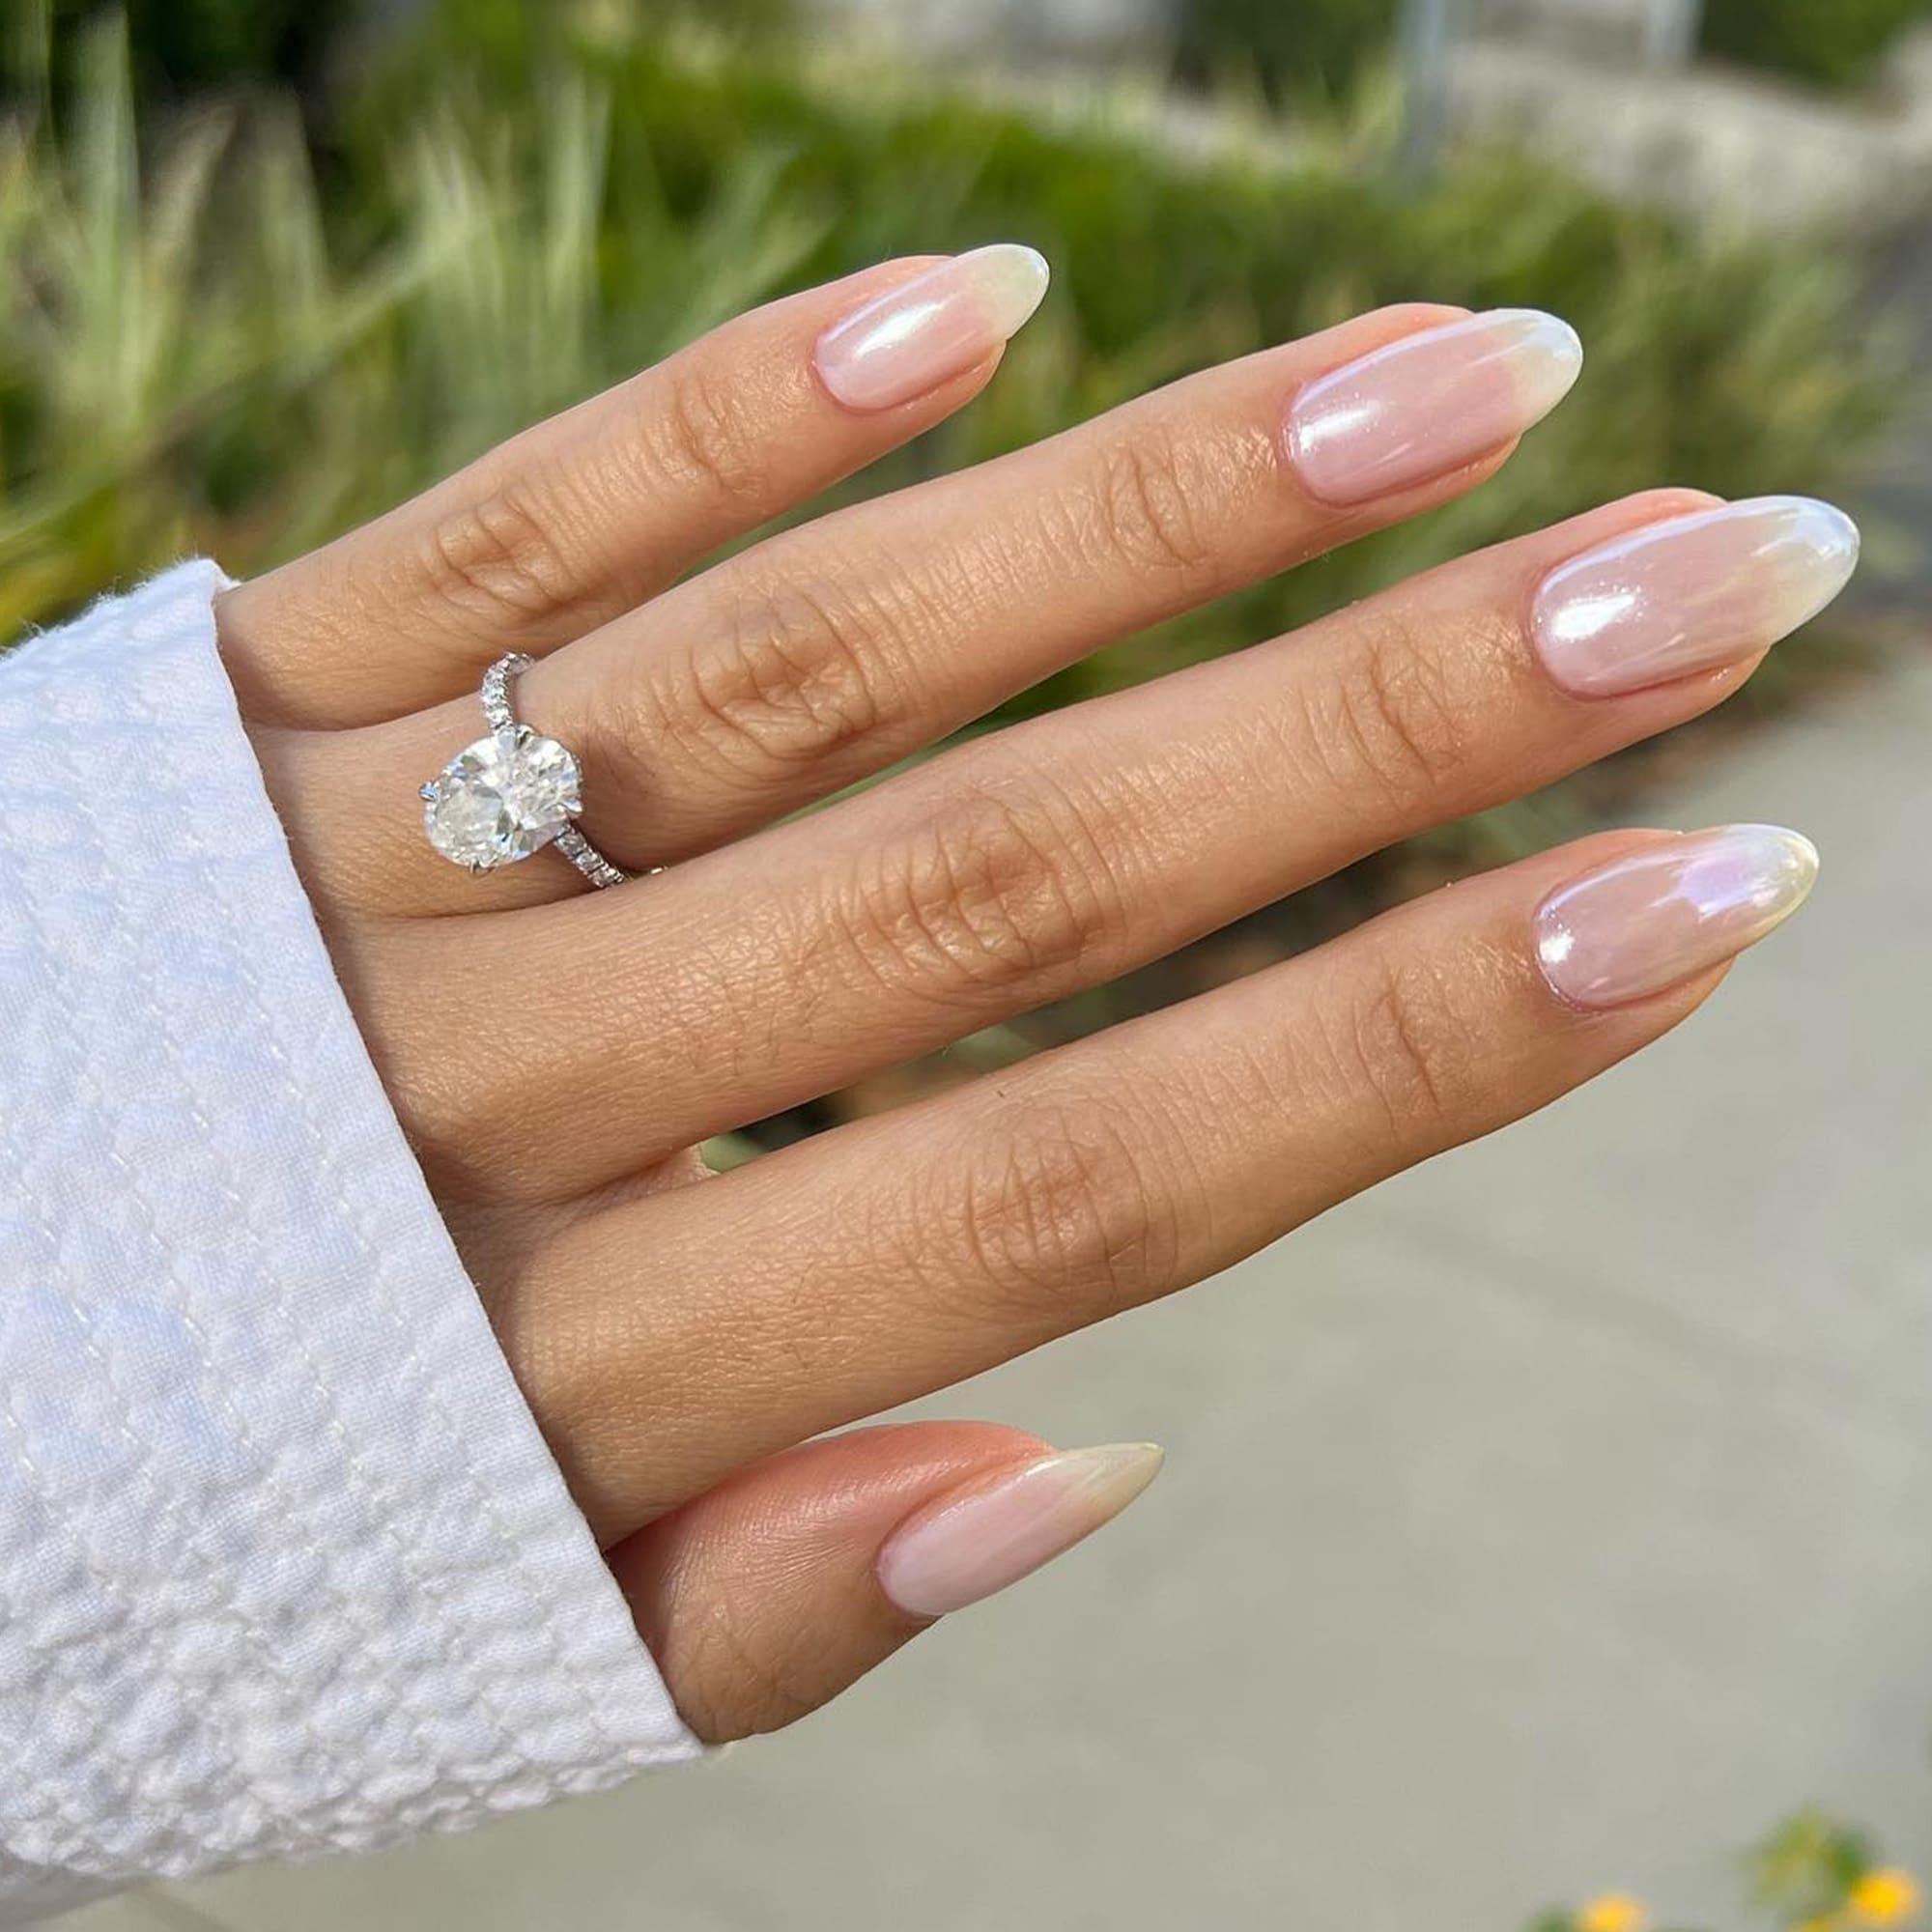 Clean Girl Aesthetic Nails, showcasing a natural and simplistic nail design.